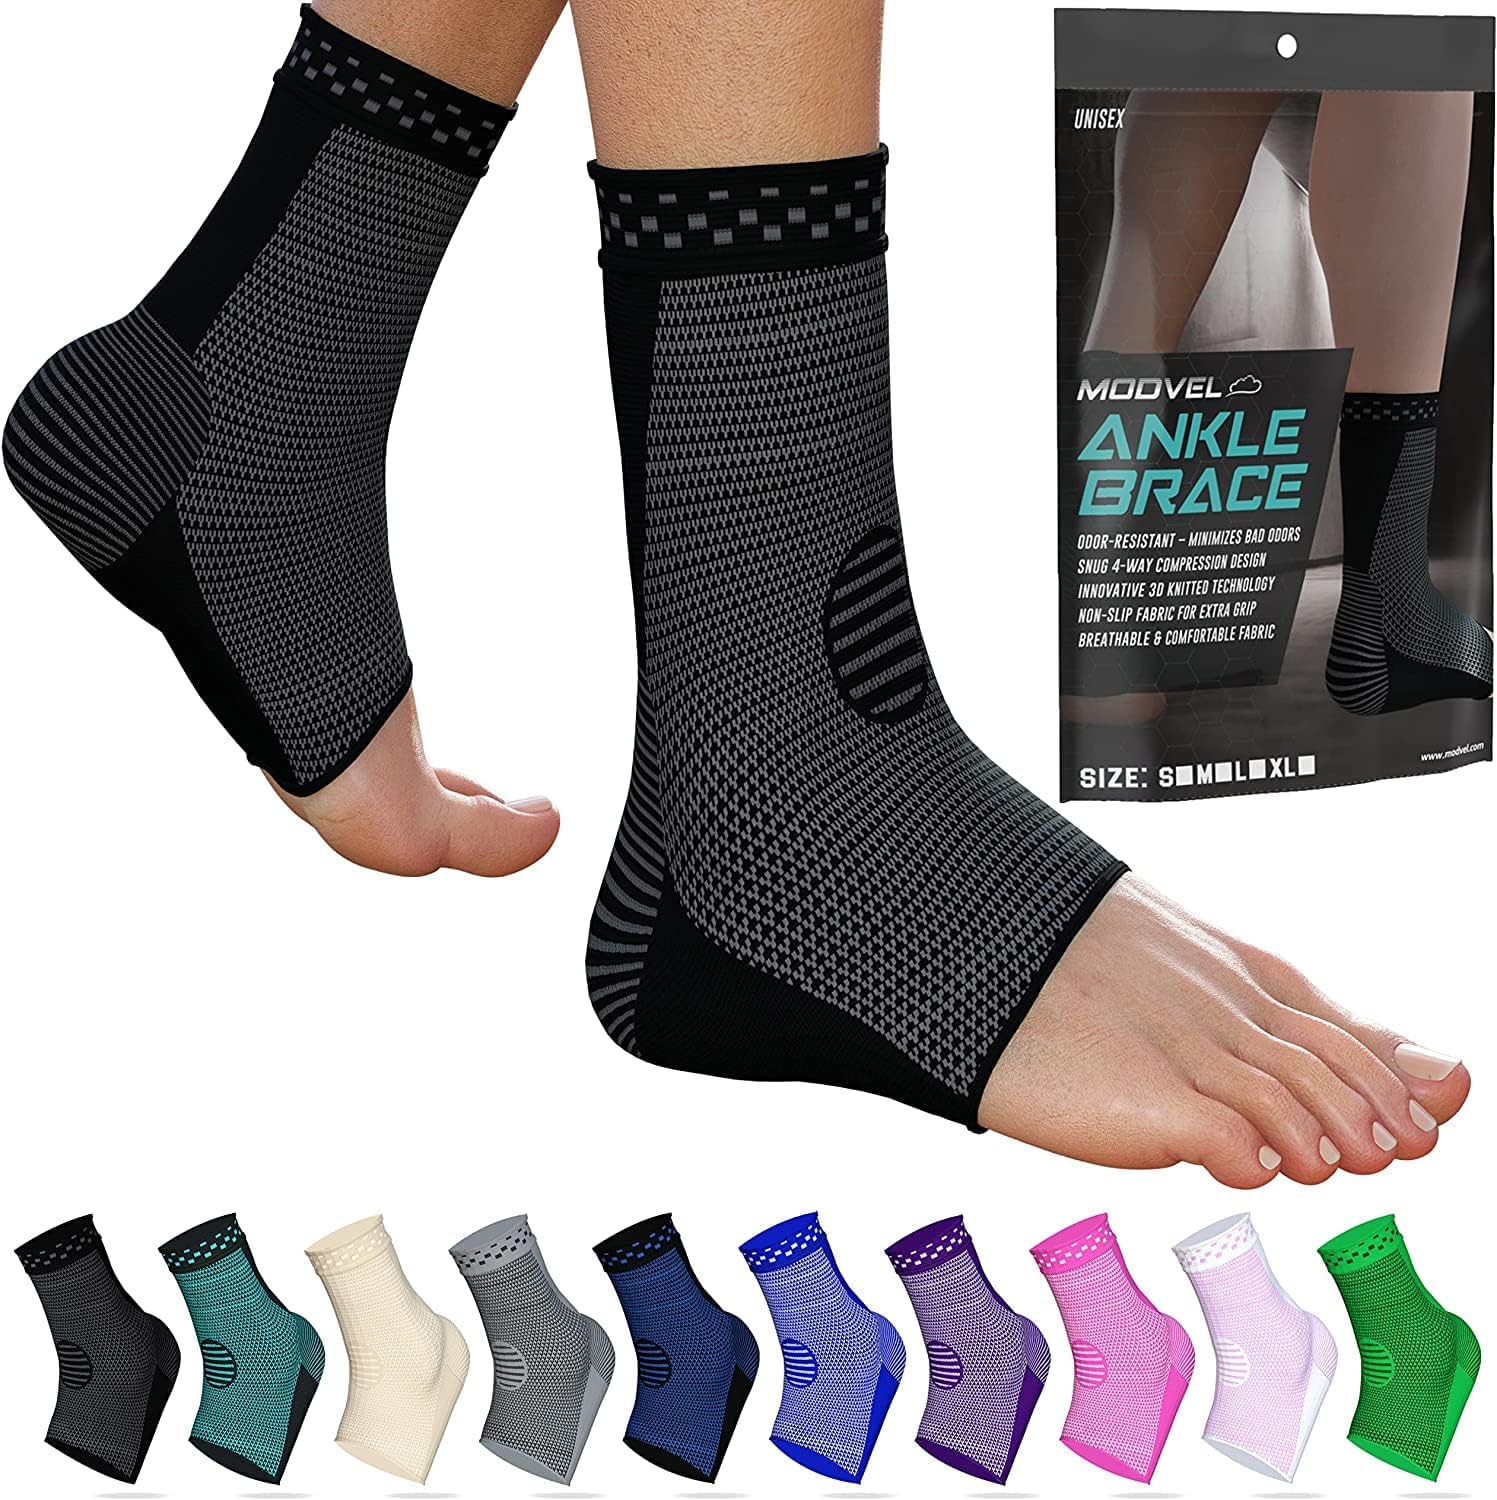 2-Pack Modvel Ankle Sleeves (black) $9.50 at Amazon